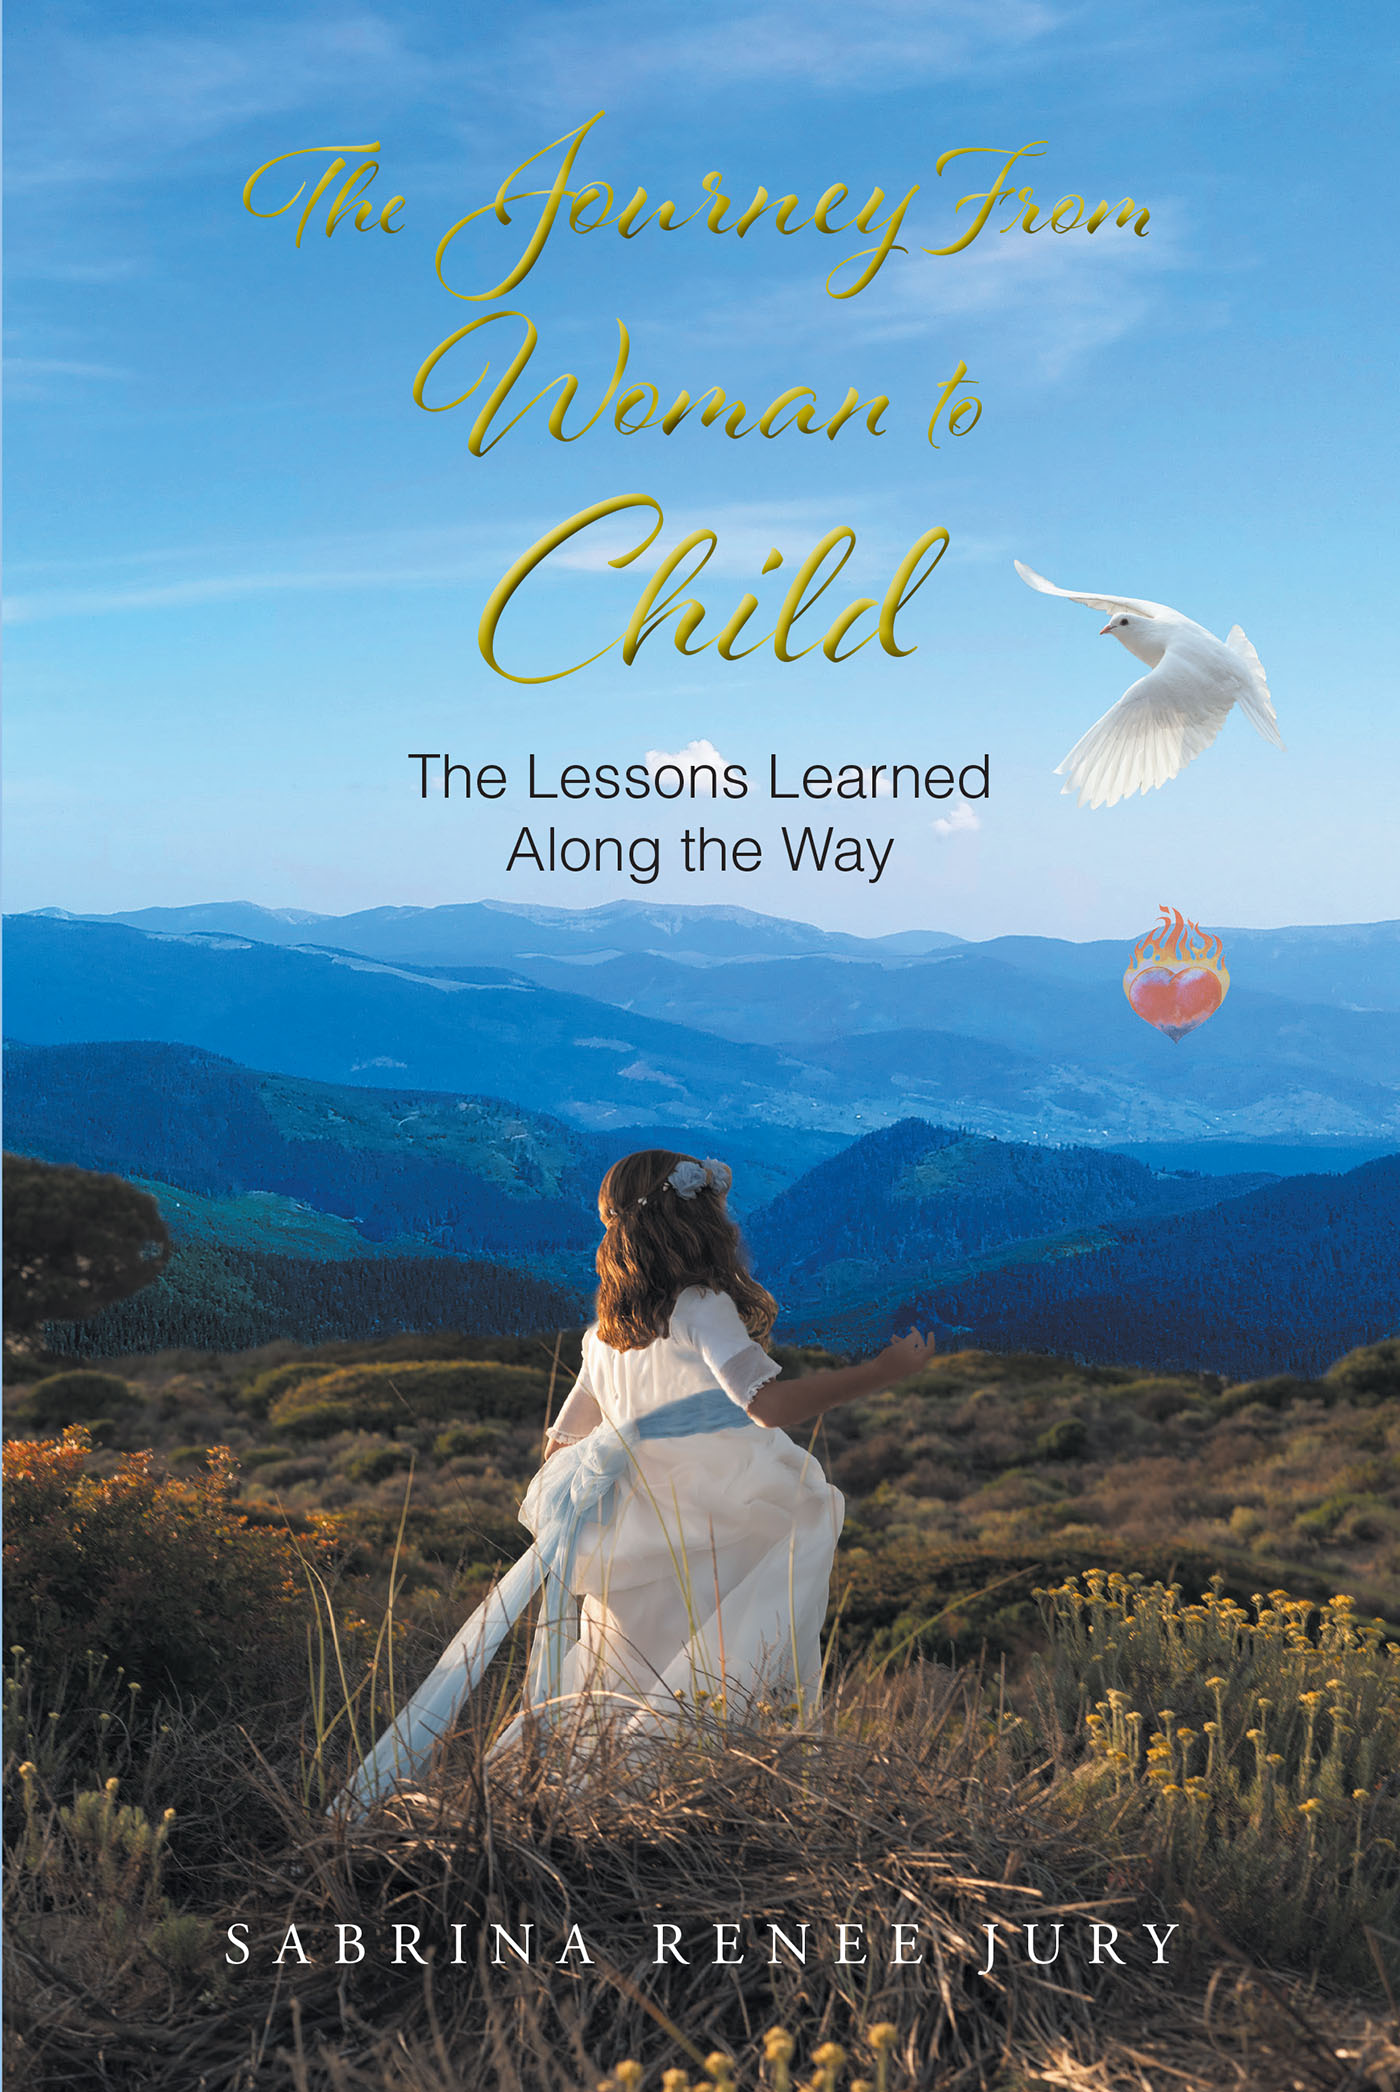 Sabrina Renee Jury’s Newly Released "The Journey From Woman to Child: The Lessons Learned Along the Way" is an Engaging Look Into Personal Lessons of Faith